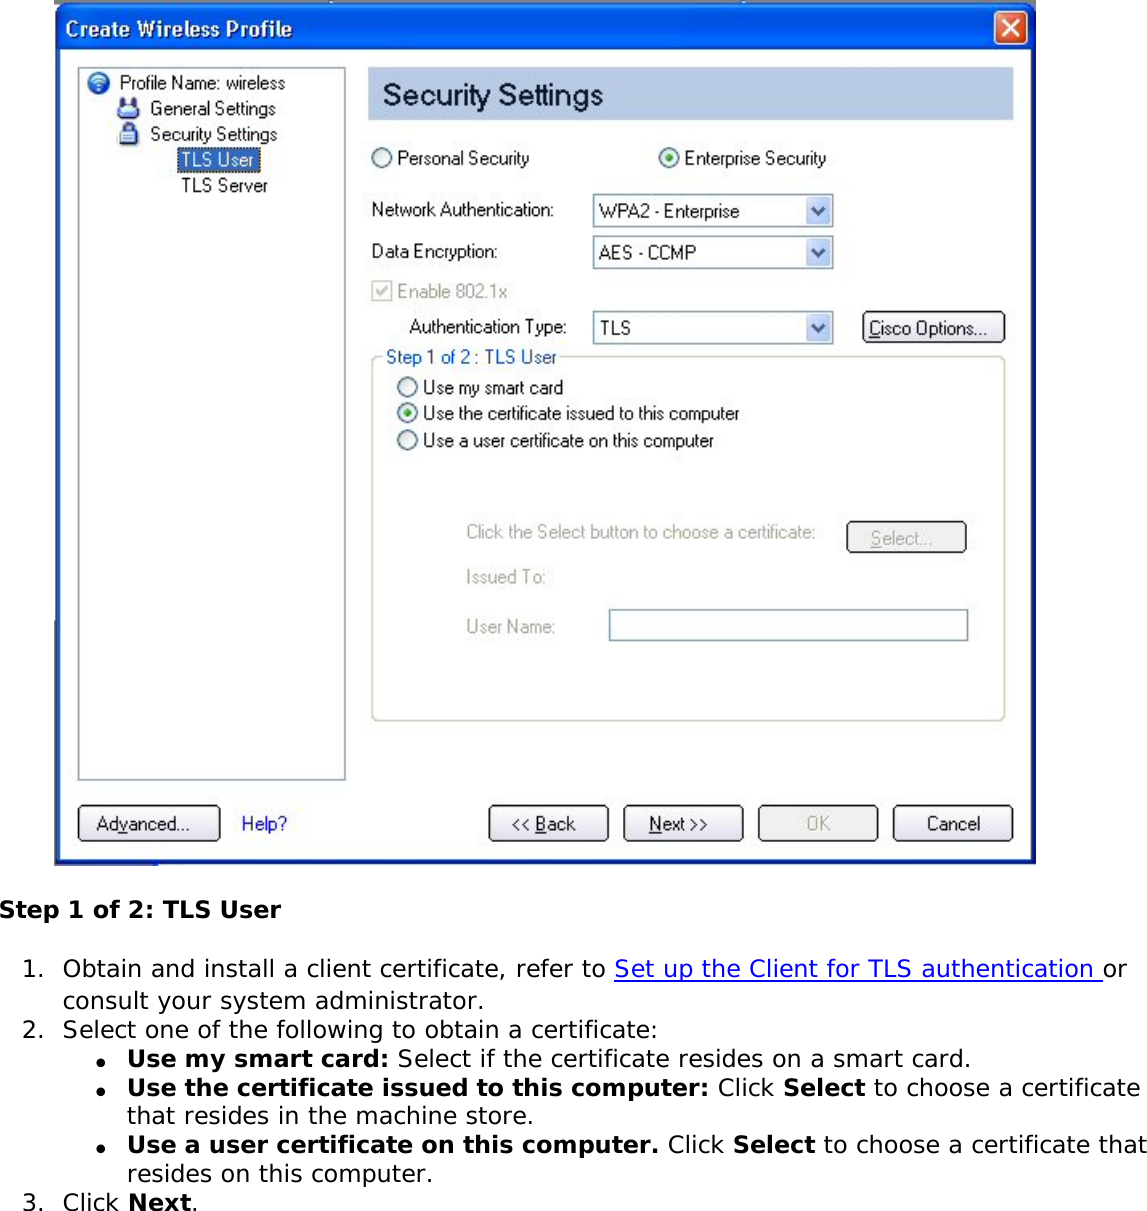 Step 1 of 2: TLS User1.  Obtain and install a client certificate, refer to Set up the Client for TLS authentication or consult your system administrator. 2.  Select one of the following to obtain a certificate: ●     Use my smart card: Select if the certificate resides on a smart card.●     Use the certificate issued to this computer: Click Select to choose a certificate that resides in the machine store.●     Use a user certificate on this computer. Click Select to choose a certificate that resides on this computer. 3.  Click Next.